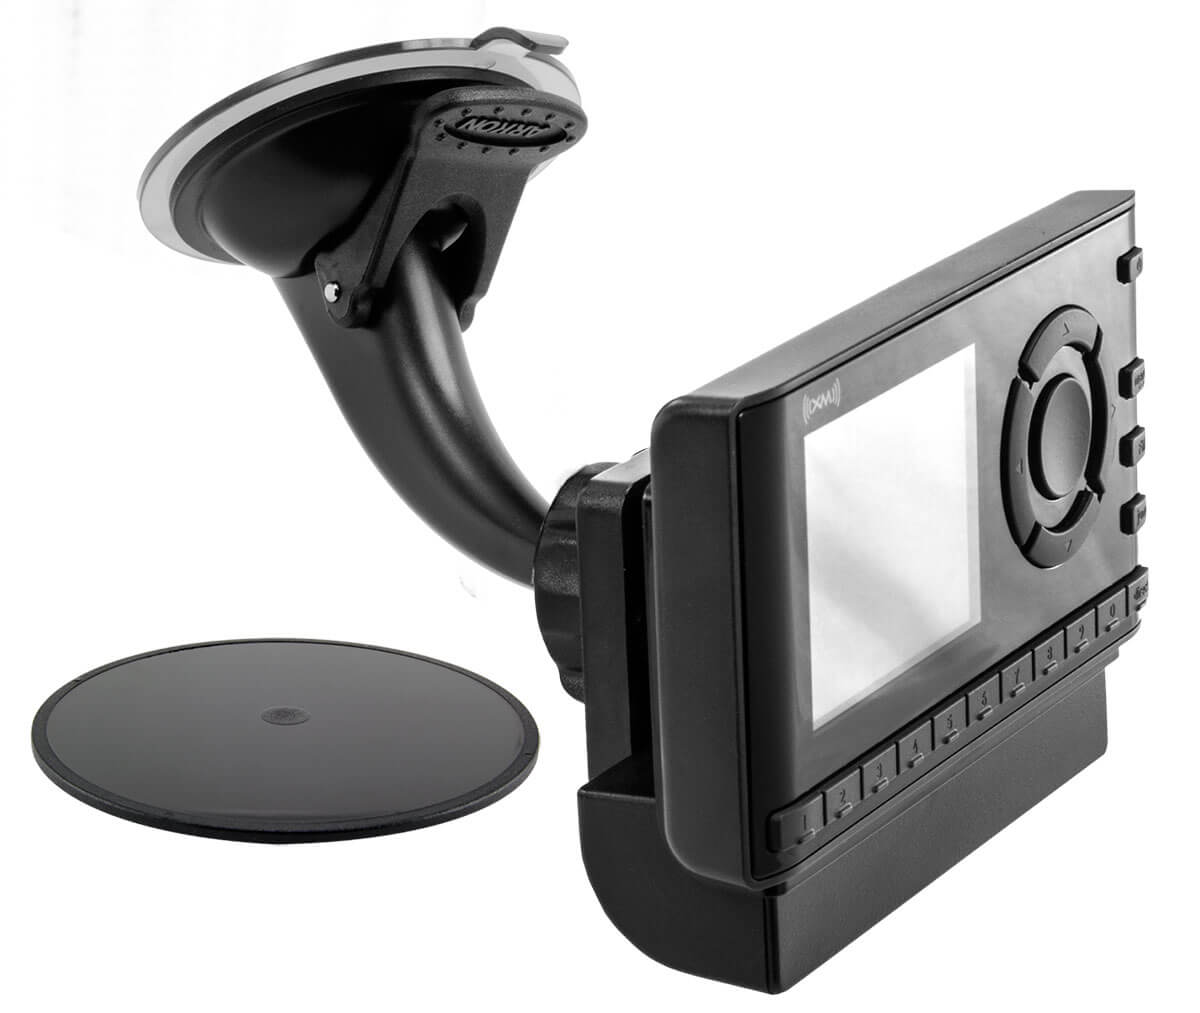 Attach your SiriusXM radio receiver to a secure suction cup mount anywhere in your vehicle